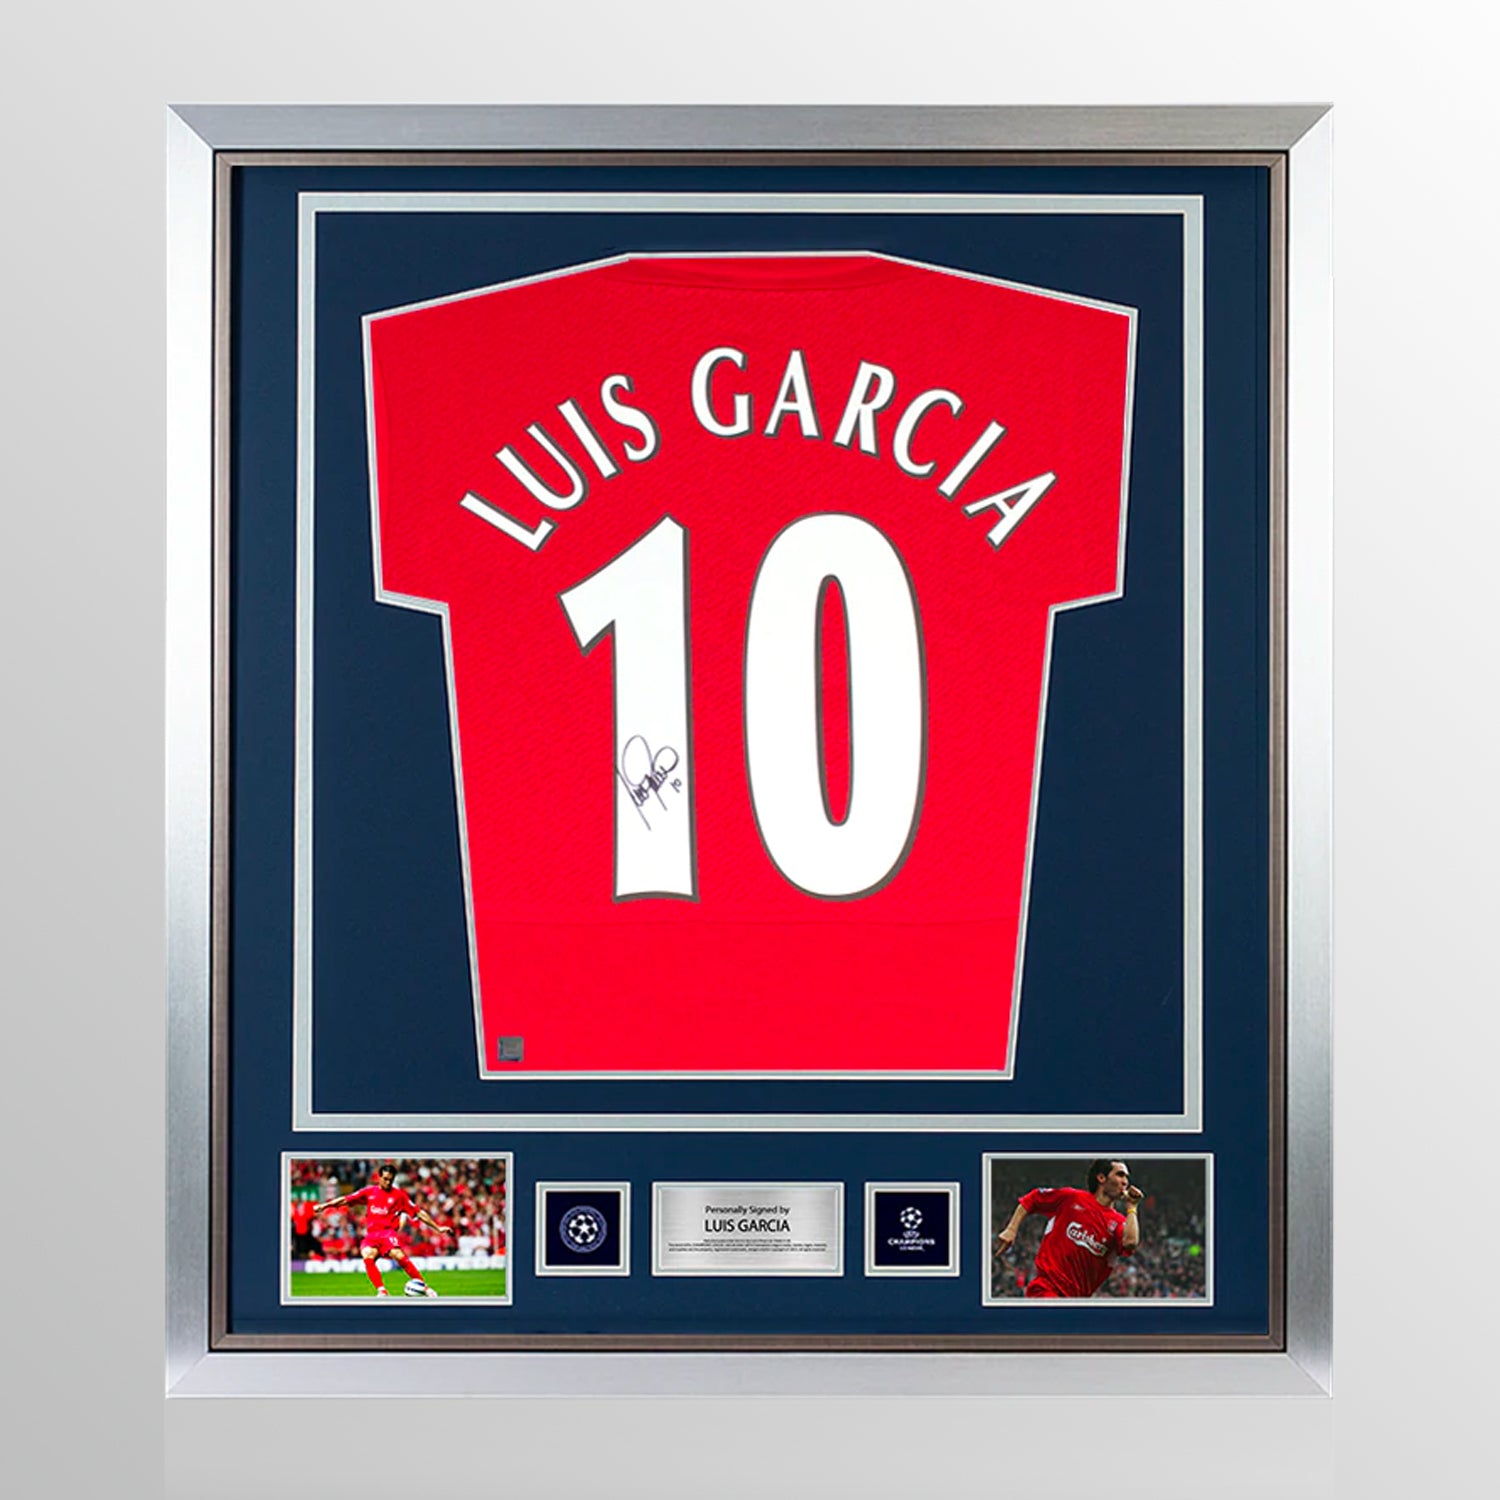 Luis Garcia Official UEFA Champions League Back Signed and Framed Liverpool 2005 Home Shirt UEFA Club Competitions Online Store